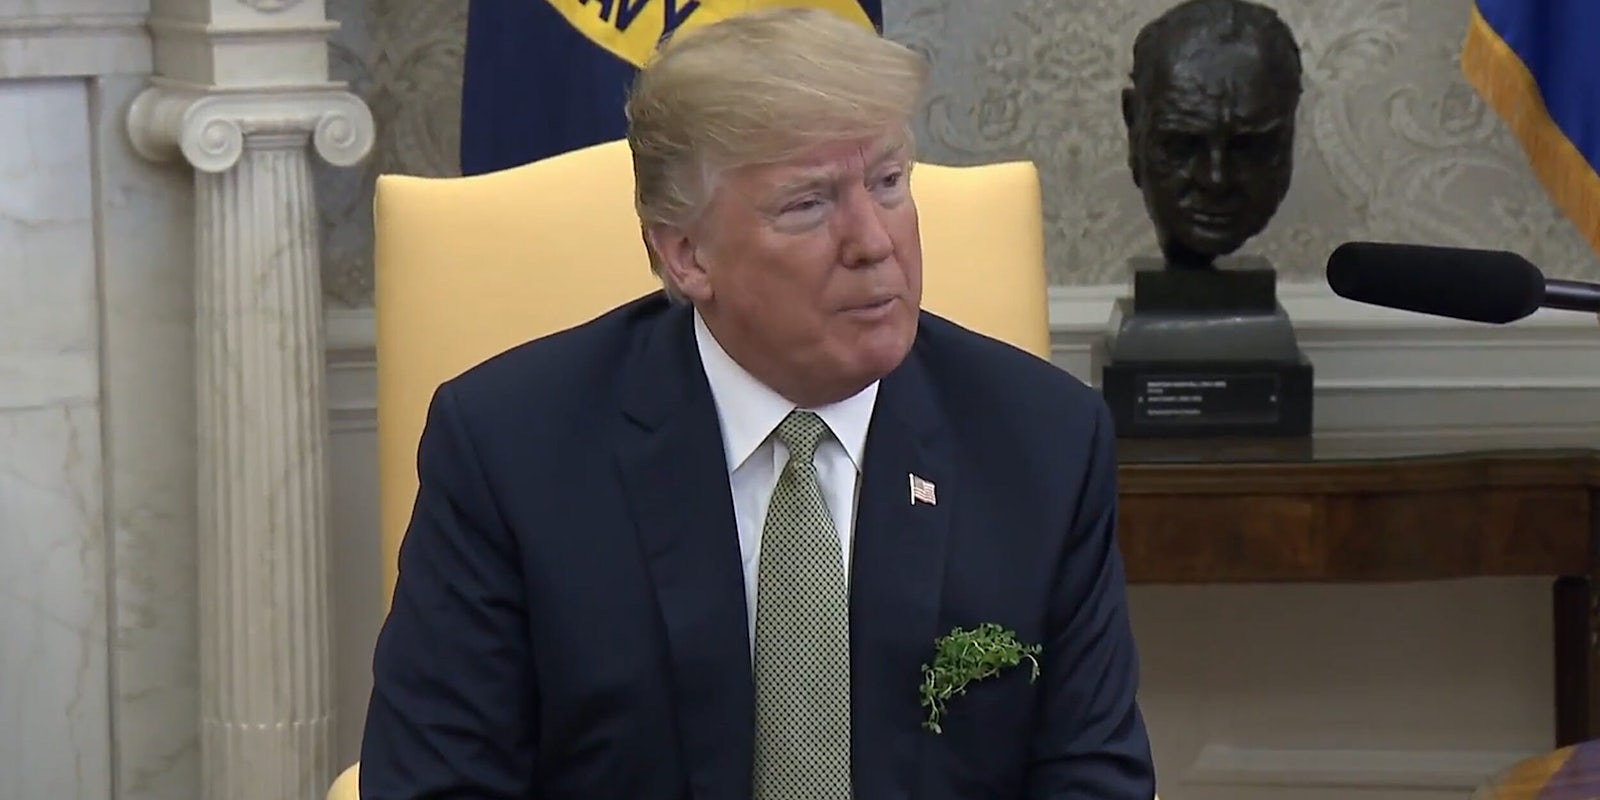 Donald Trump with clover in his jacket pocket